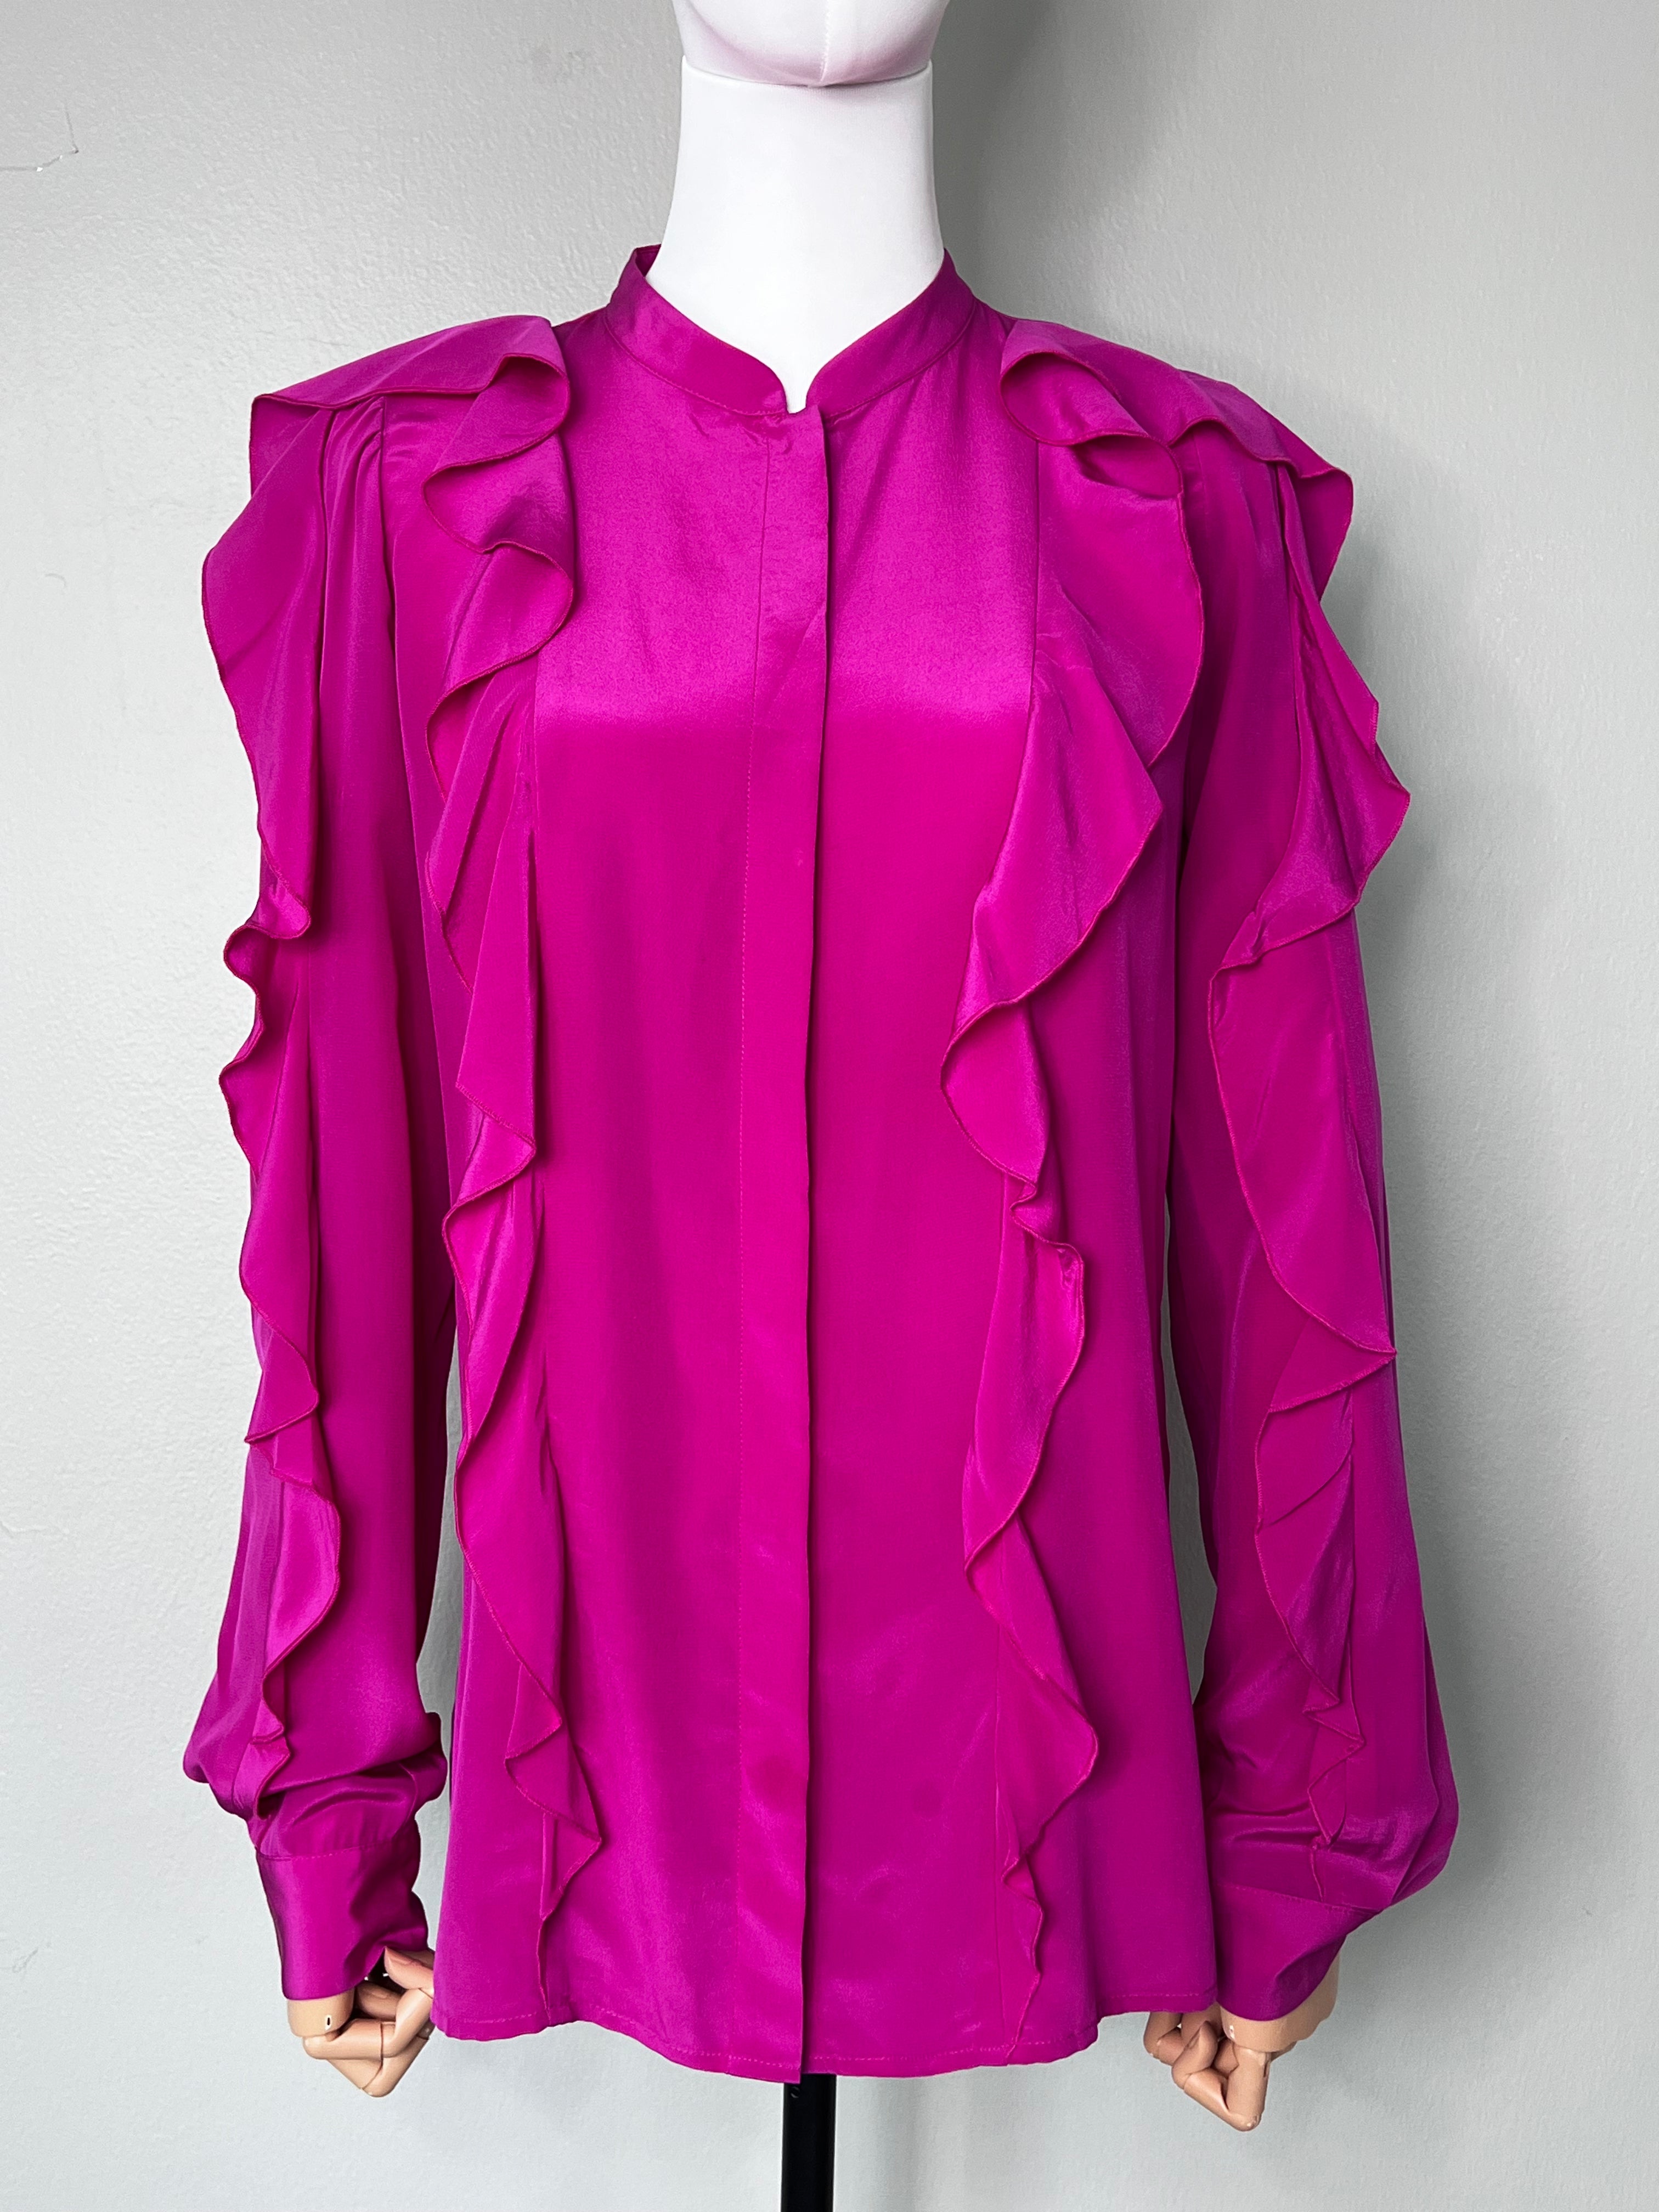 Fucia pink shirt with raffles design - See by Chloe